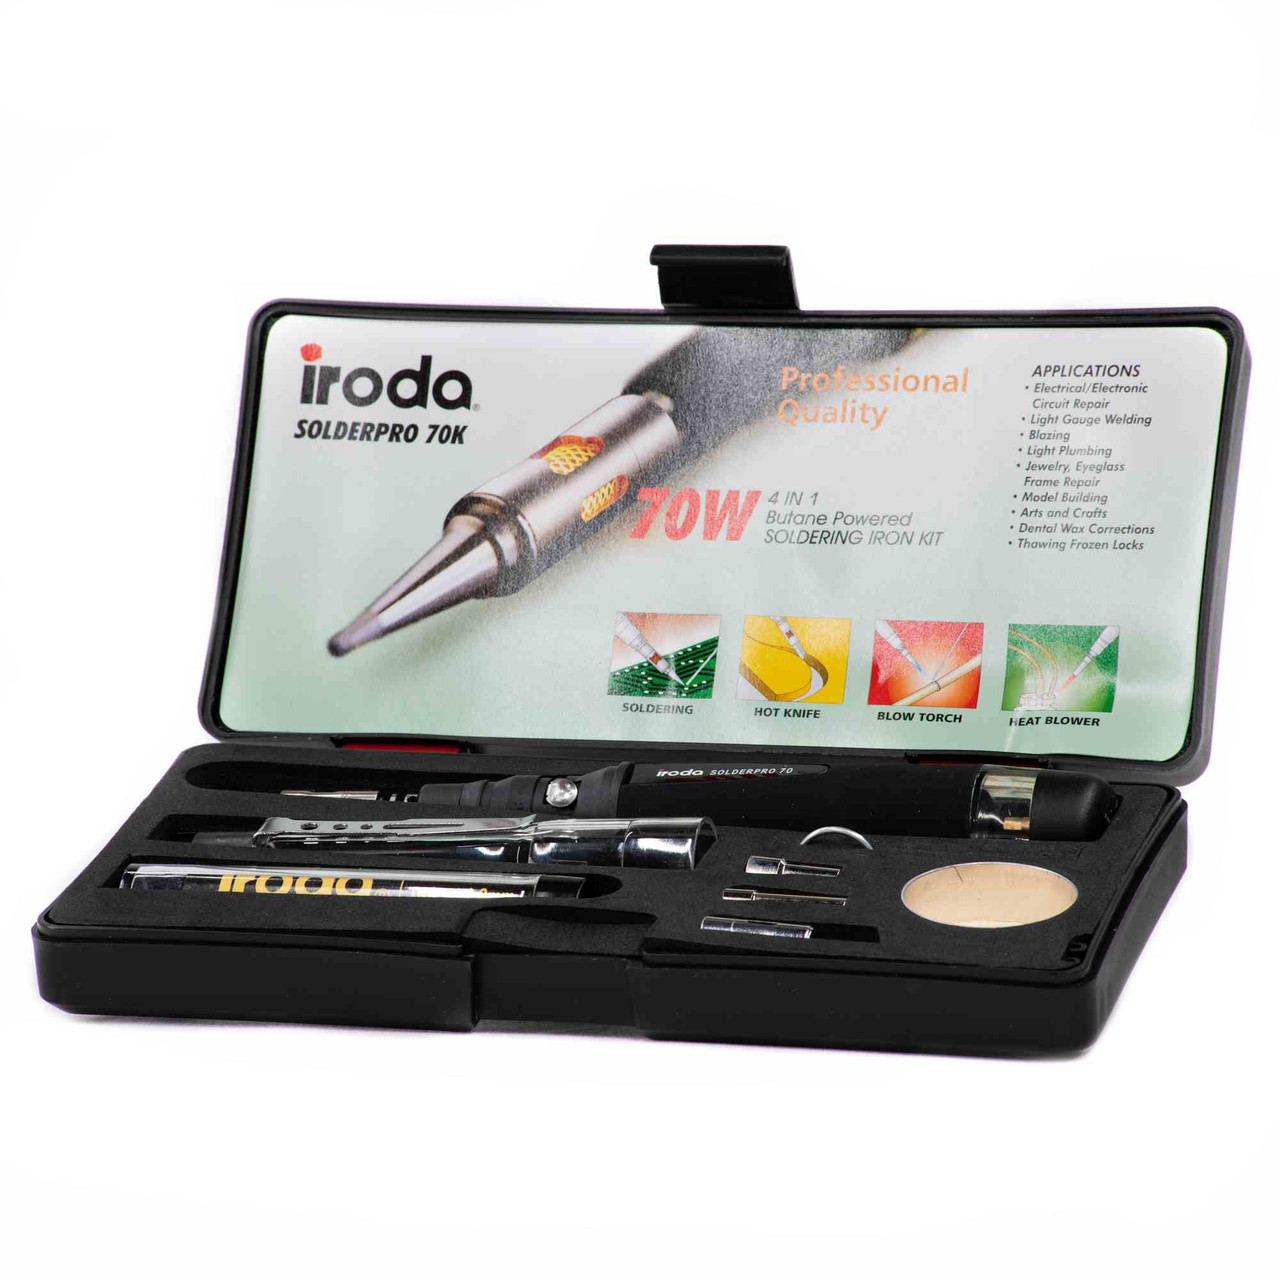 Iroda SP-70 Soldering Iron Kit.  Includes Carrying Case, Solder Coil, Safety Cap with Starter Flint, and 4 Interchangeable Tips (Conical Head, Hot Knife, Hot Air and Torch Tips)